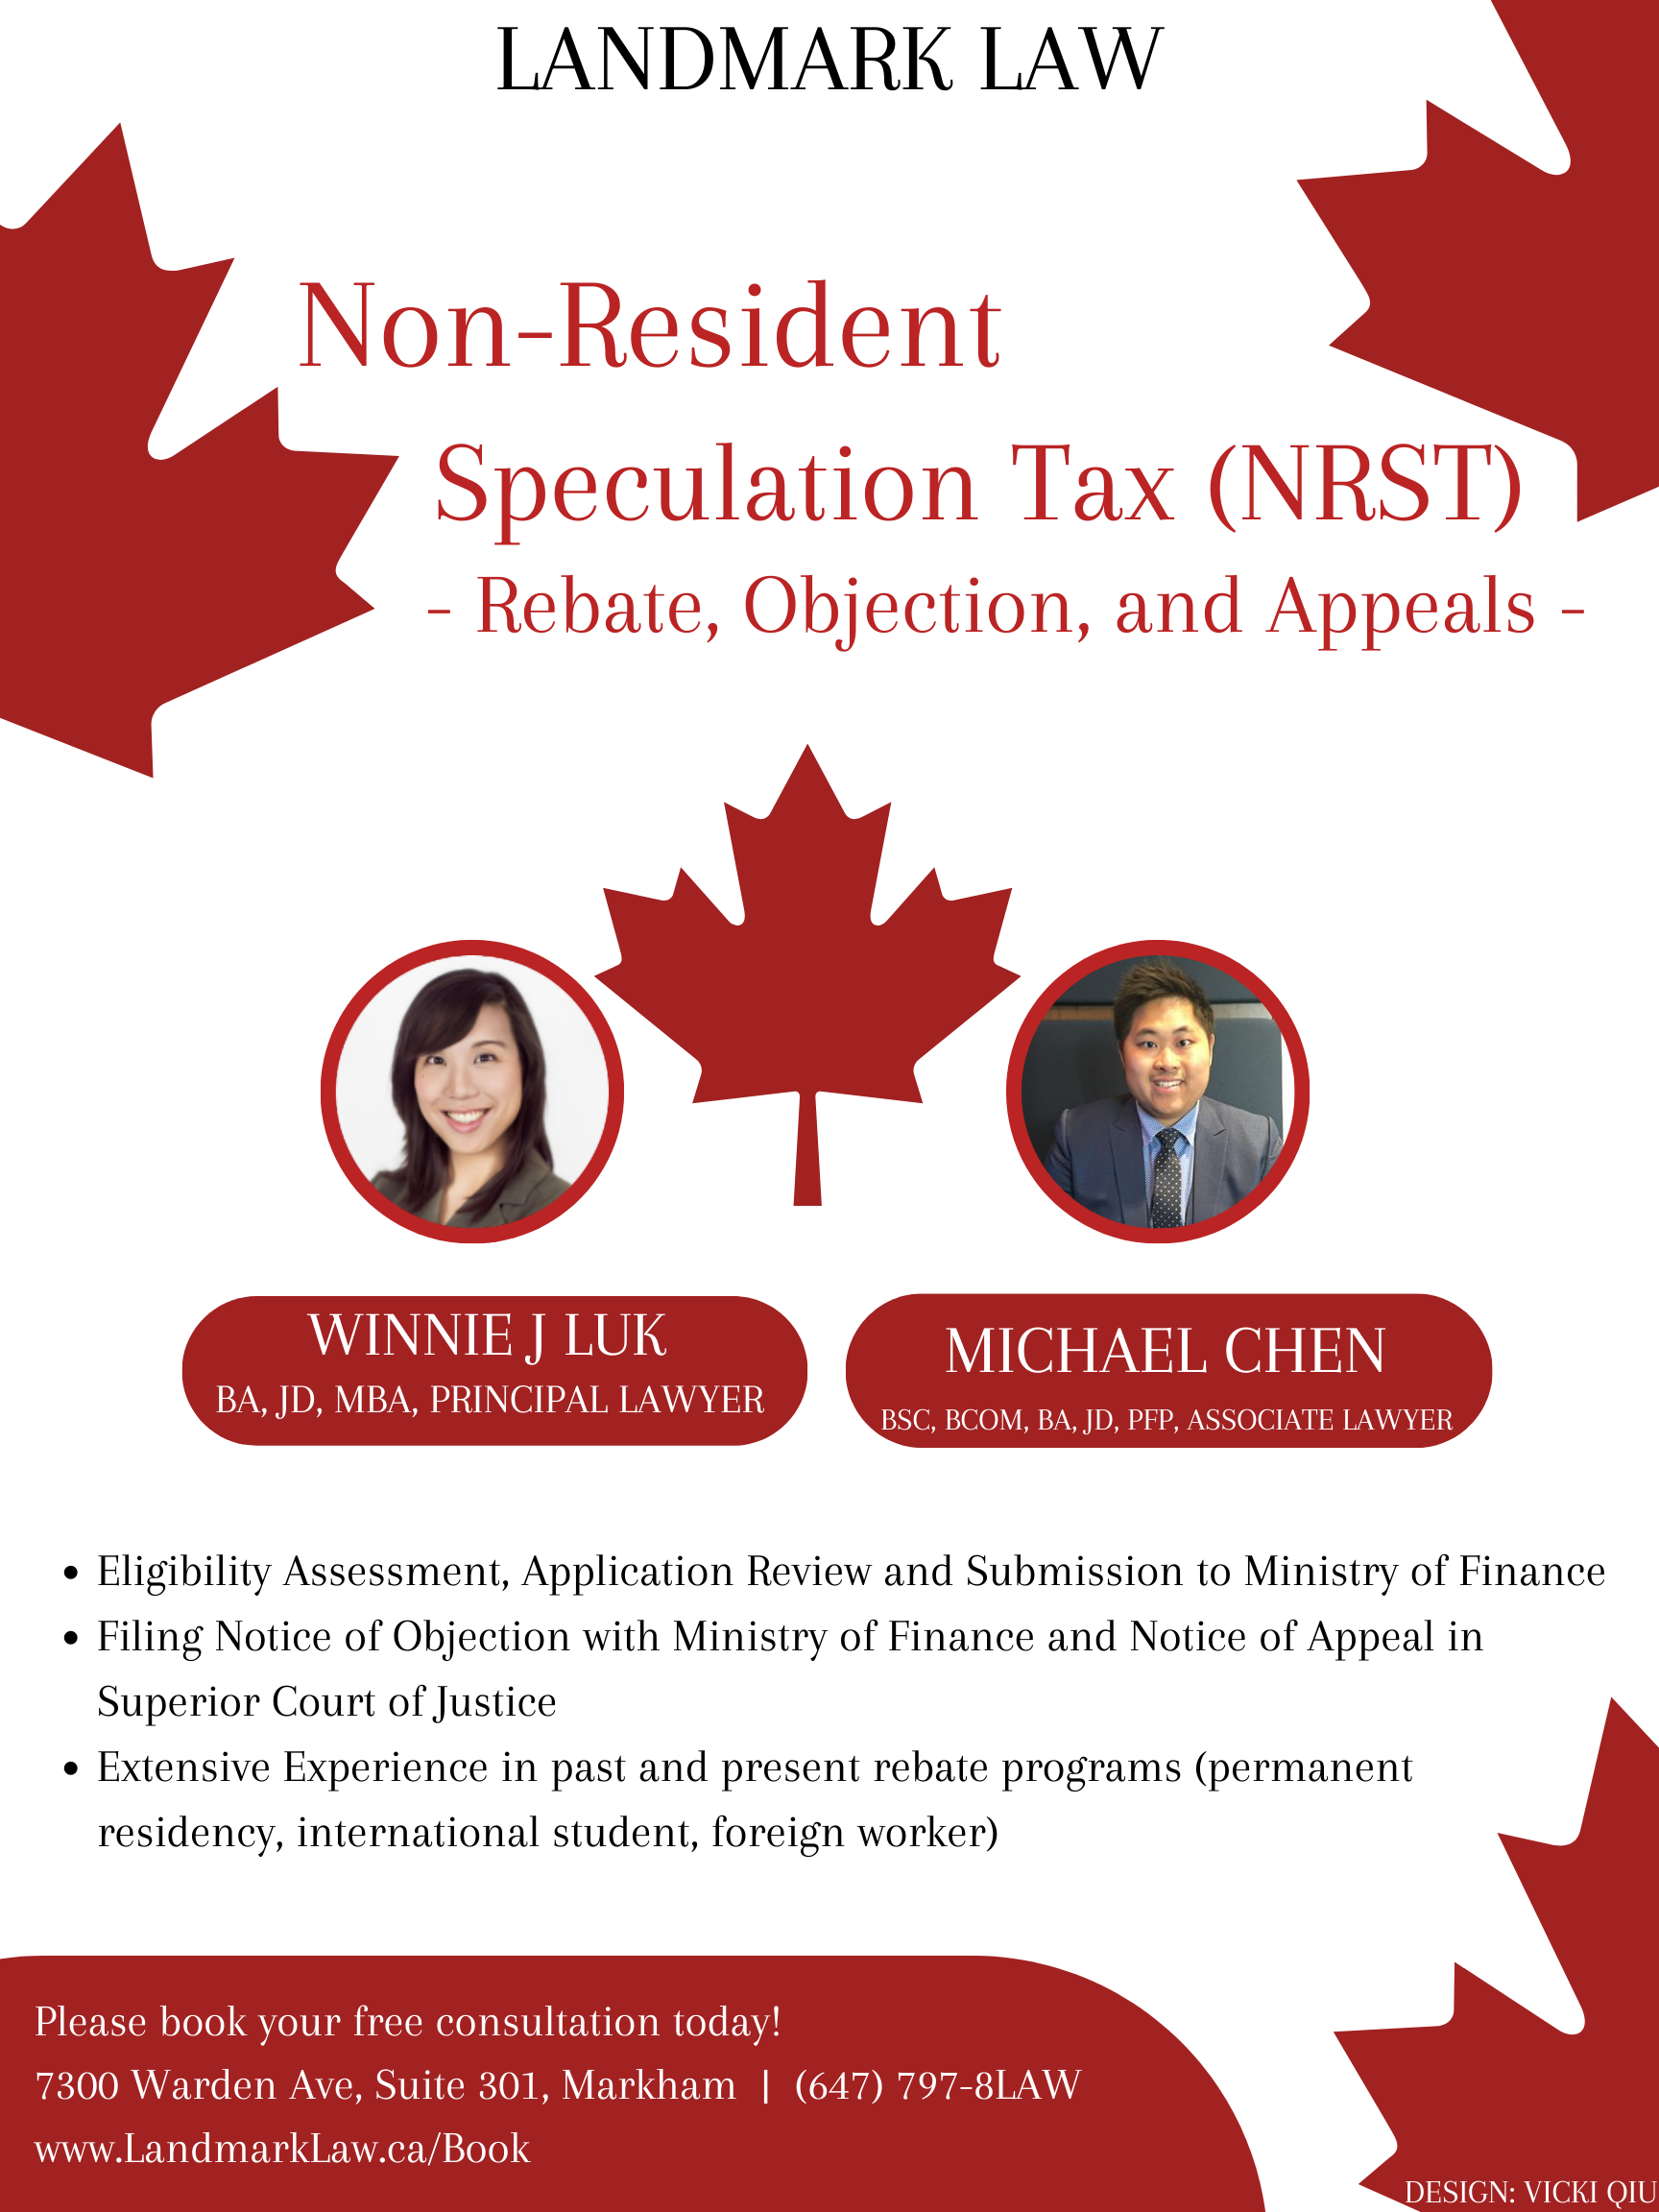 Non Resident Speculation Tax NRST Objecting To Or Appealing The 